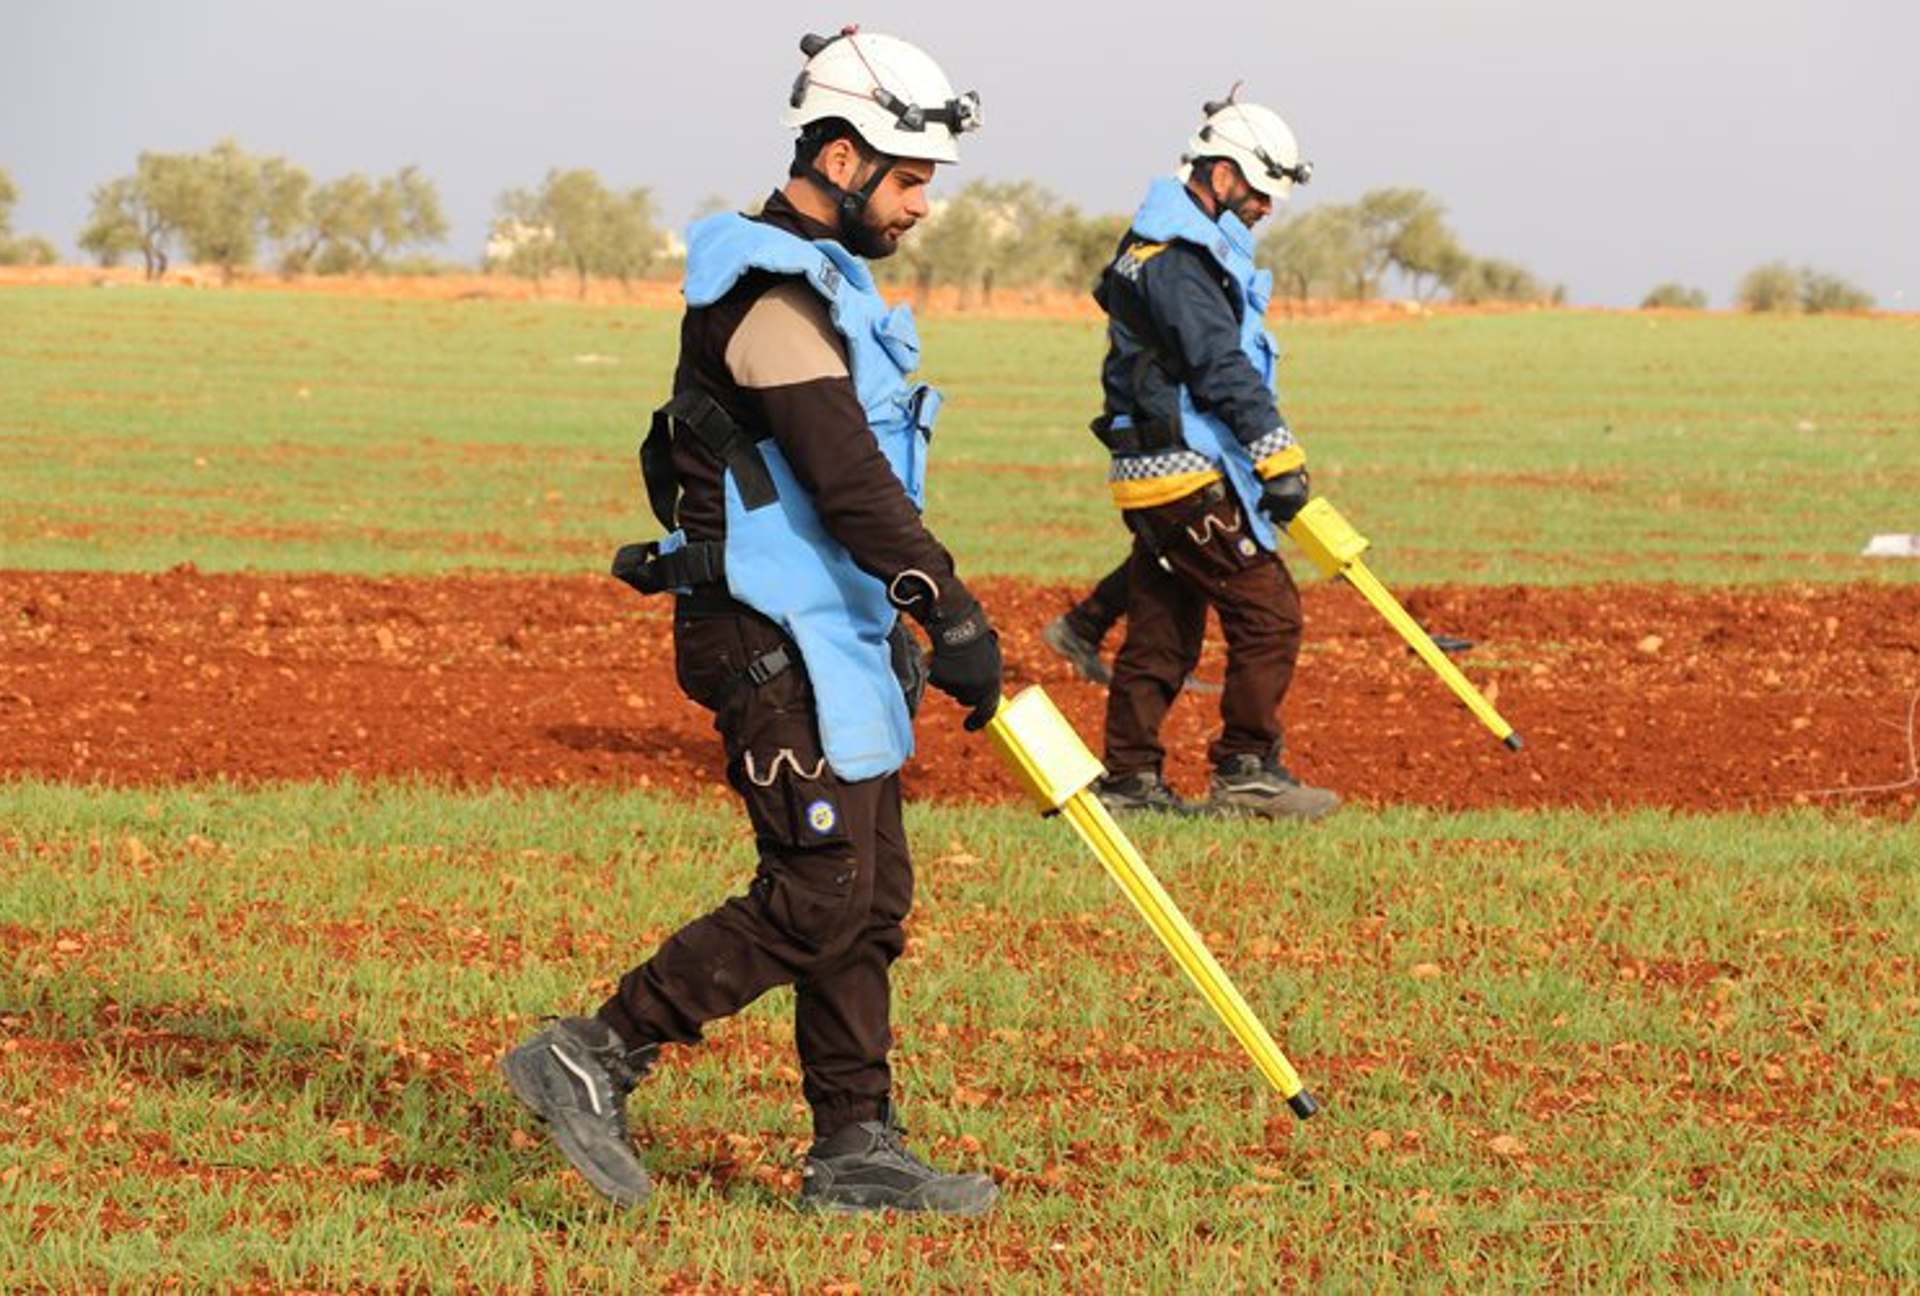 White Helmets volunteers search Syrian farmlands for unexploded ordnance (Syria Civil Defence)